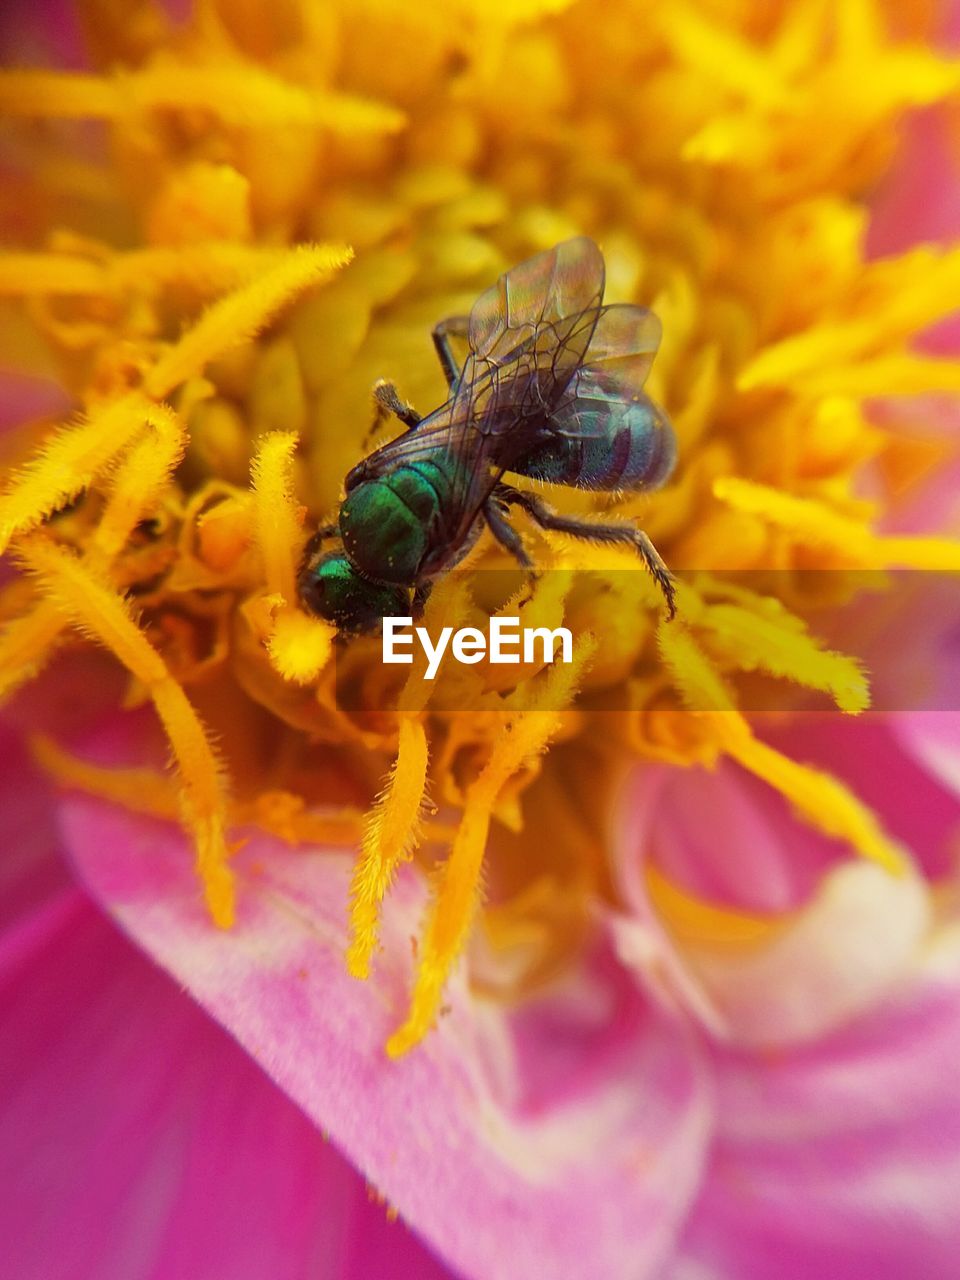 EXTREME CLOSE-UP OF INSECT ON FLOWER